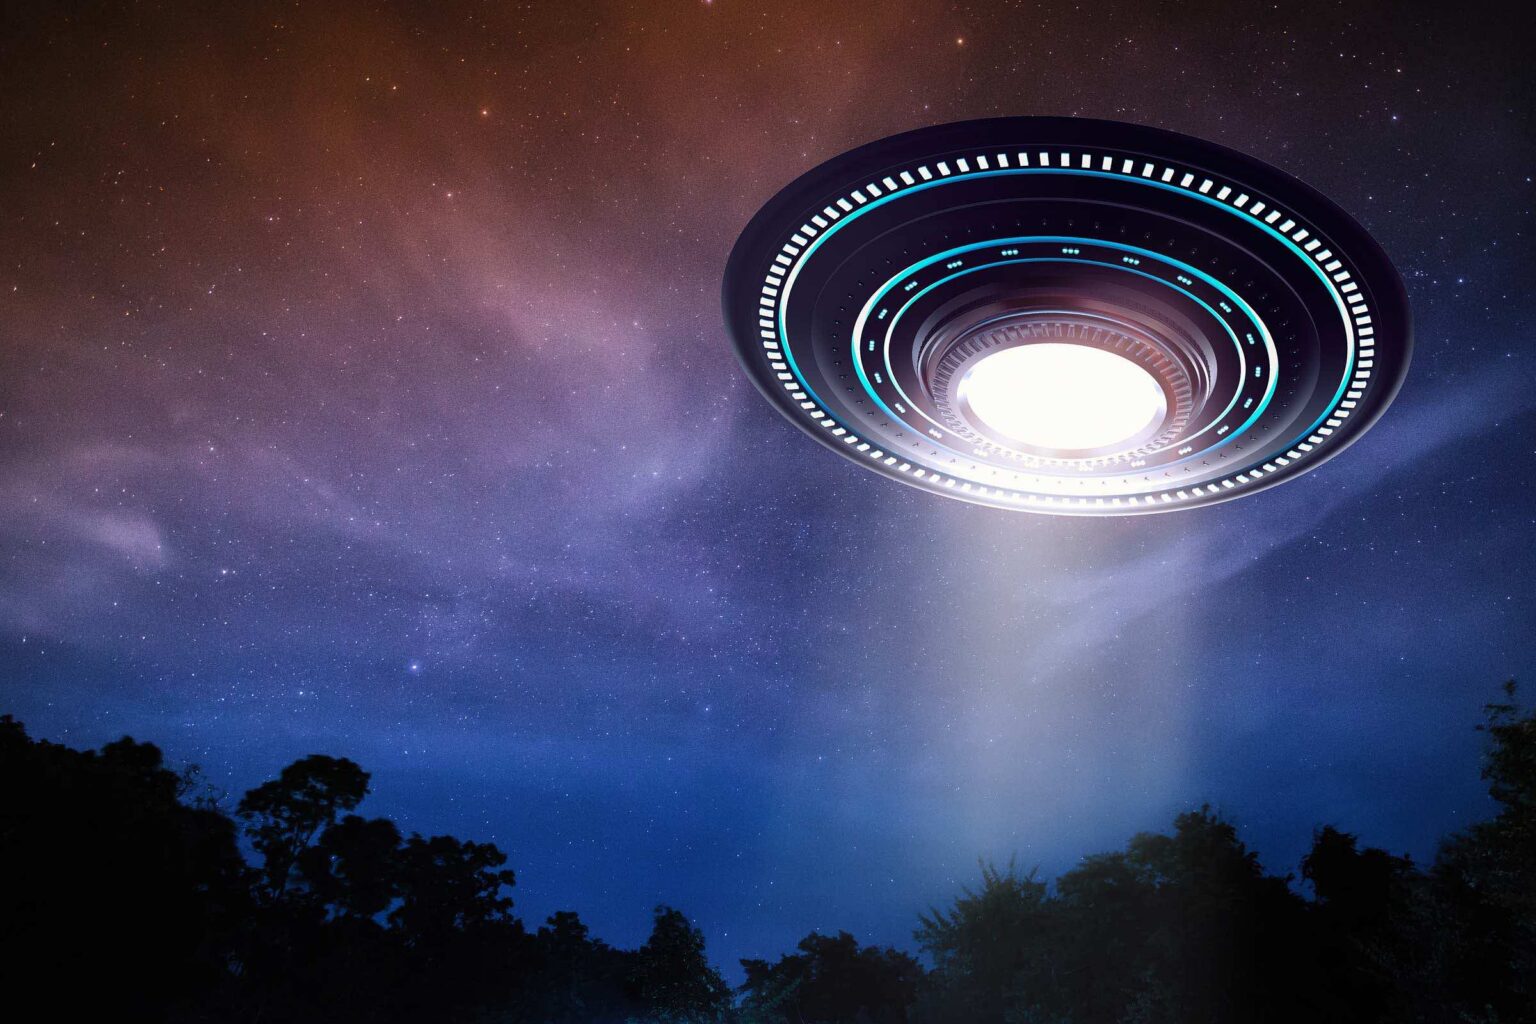 Are UFOs real? Still not convinced in life from other planets? Click to learn about all the scientists arguing UFOs really do exist.